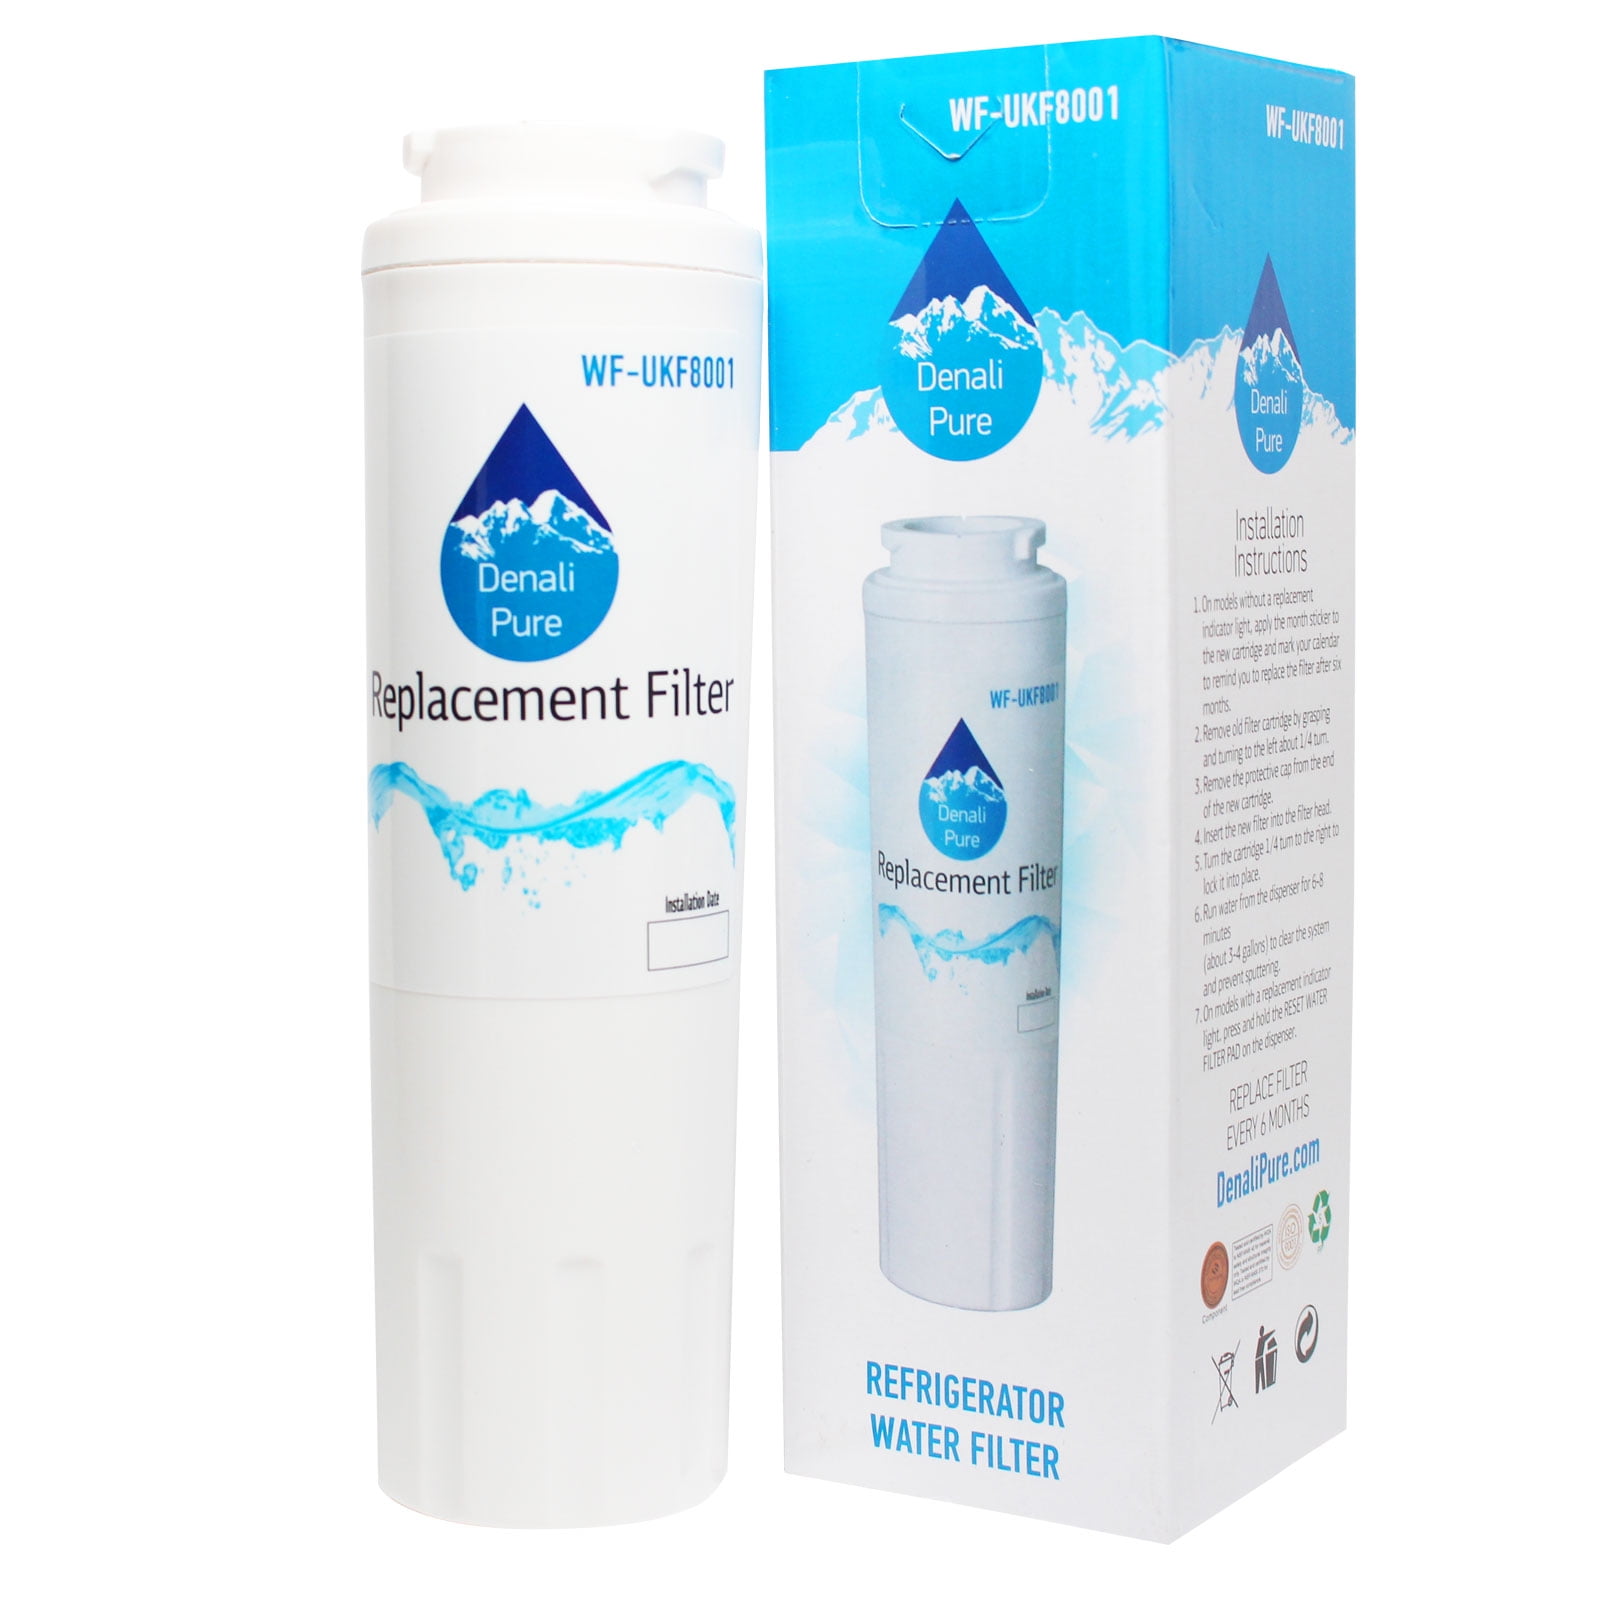 1 Refresh Replacement Water Filter Fits GZ25FSRXYY2 GI6FDRXXB00 Refrigerators 